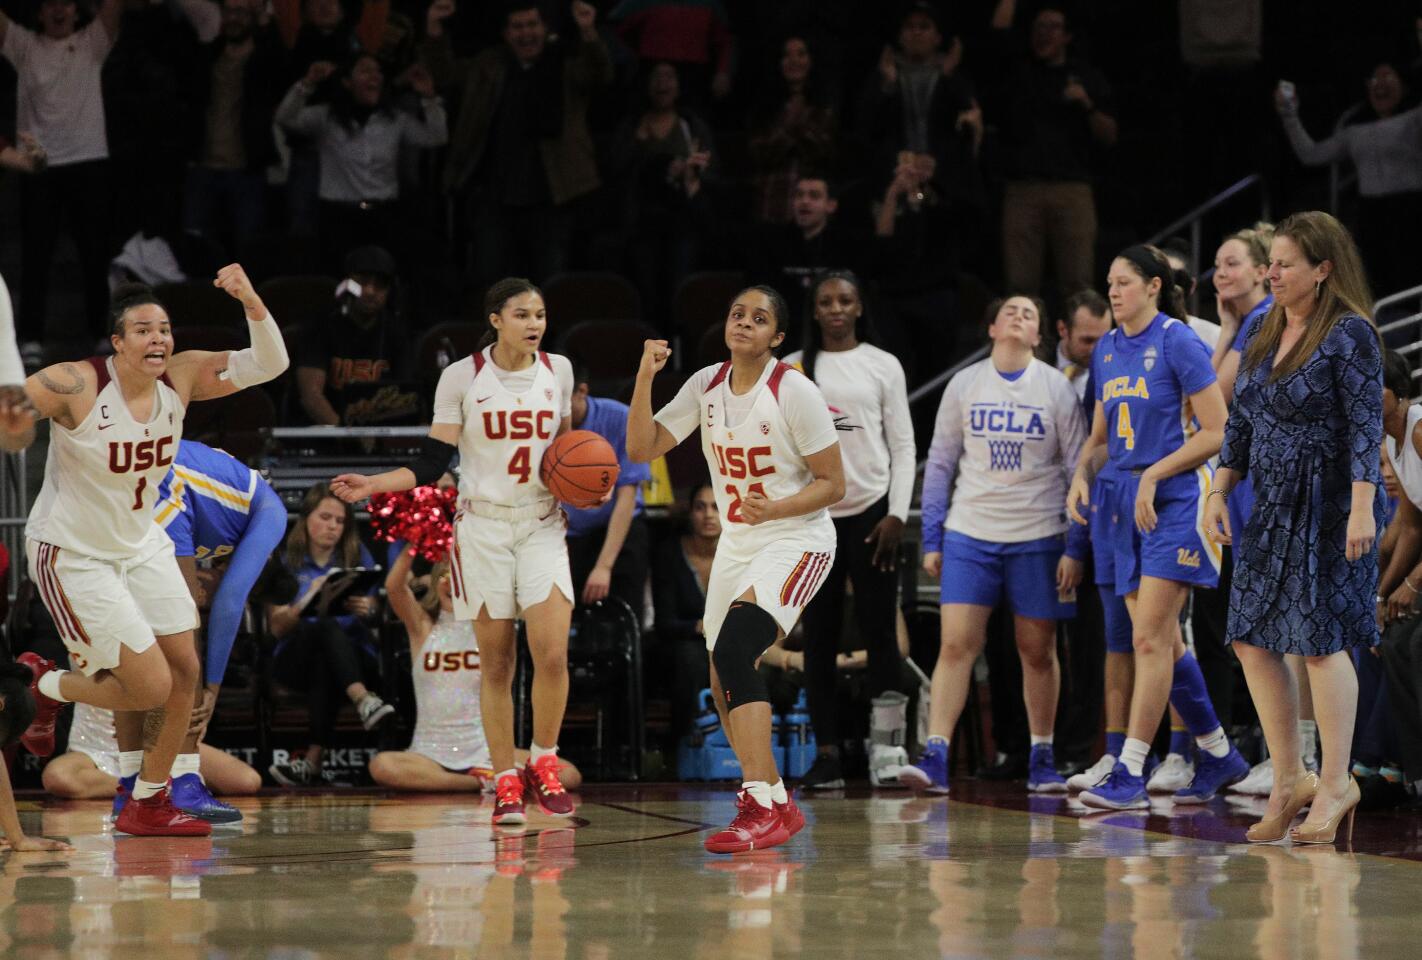 USC forward Kayla Overbeck (1) and guards Endyia Rogers (4) and Desiree Caldwell (24) react after handing UCLA its first loss of the season in double overtime at Galen Center.